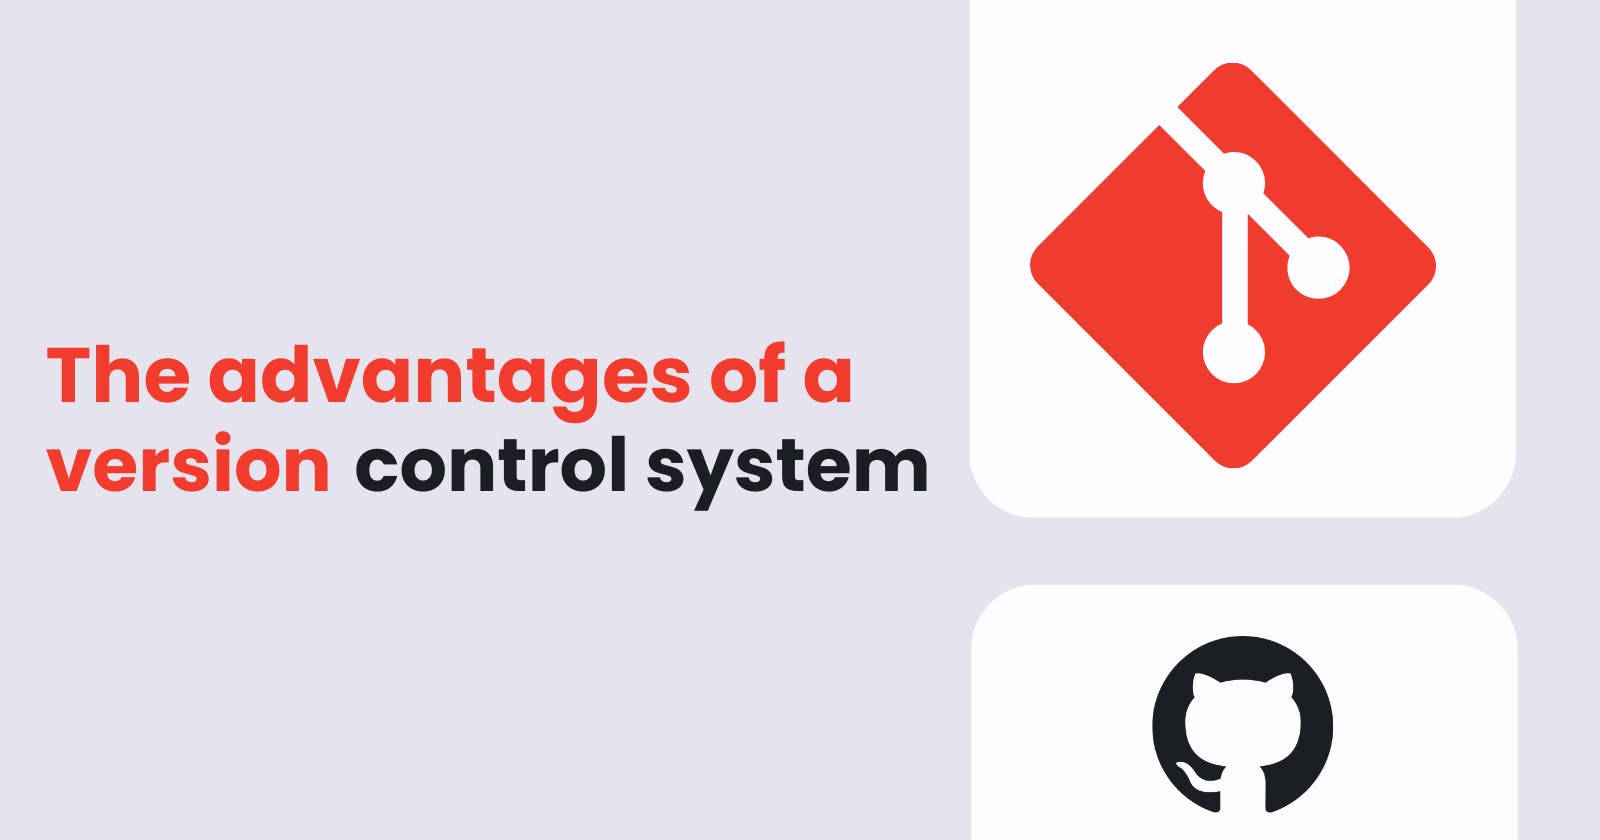 The advantages of using a version control system